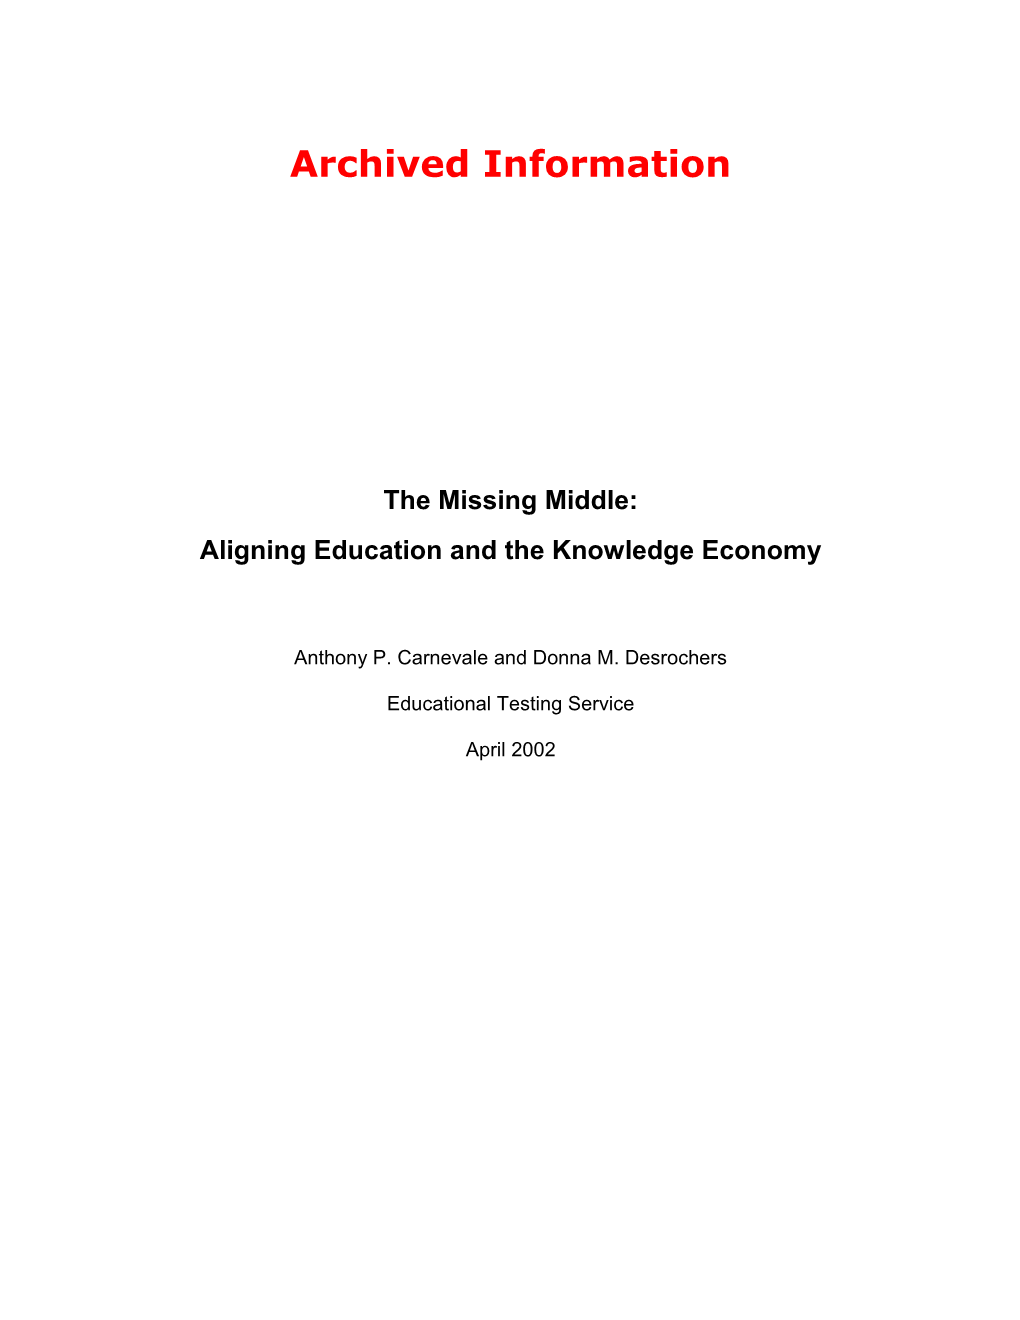 Archived: the Missing Middle: Aligning Education and the Knowledge Economy (MS Word)